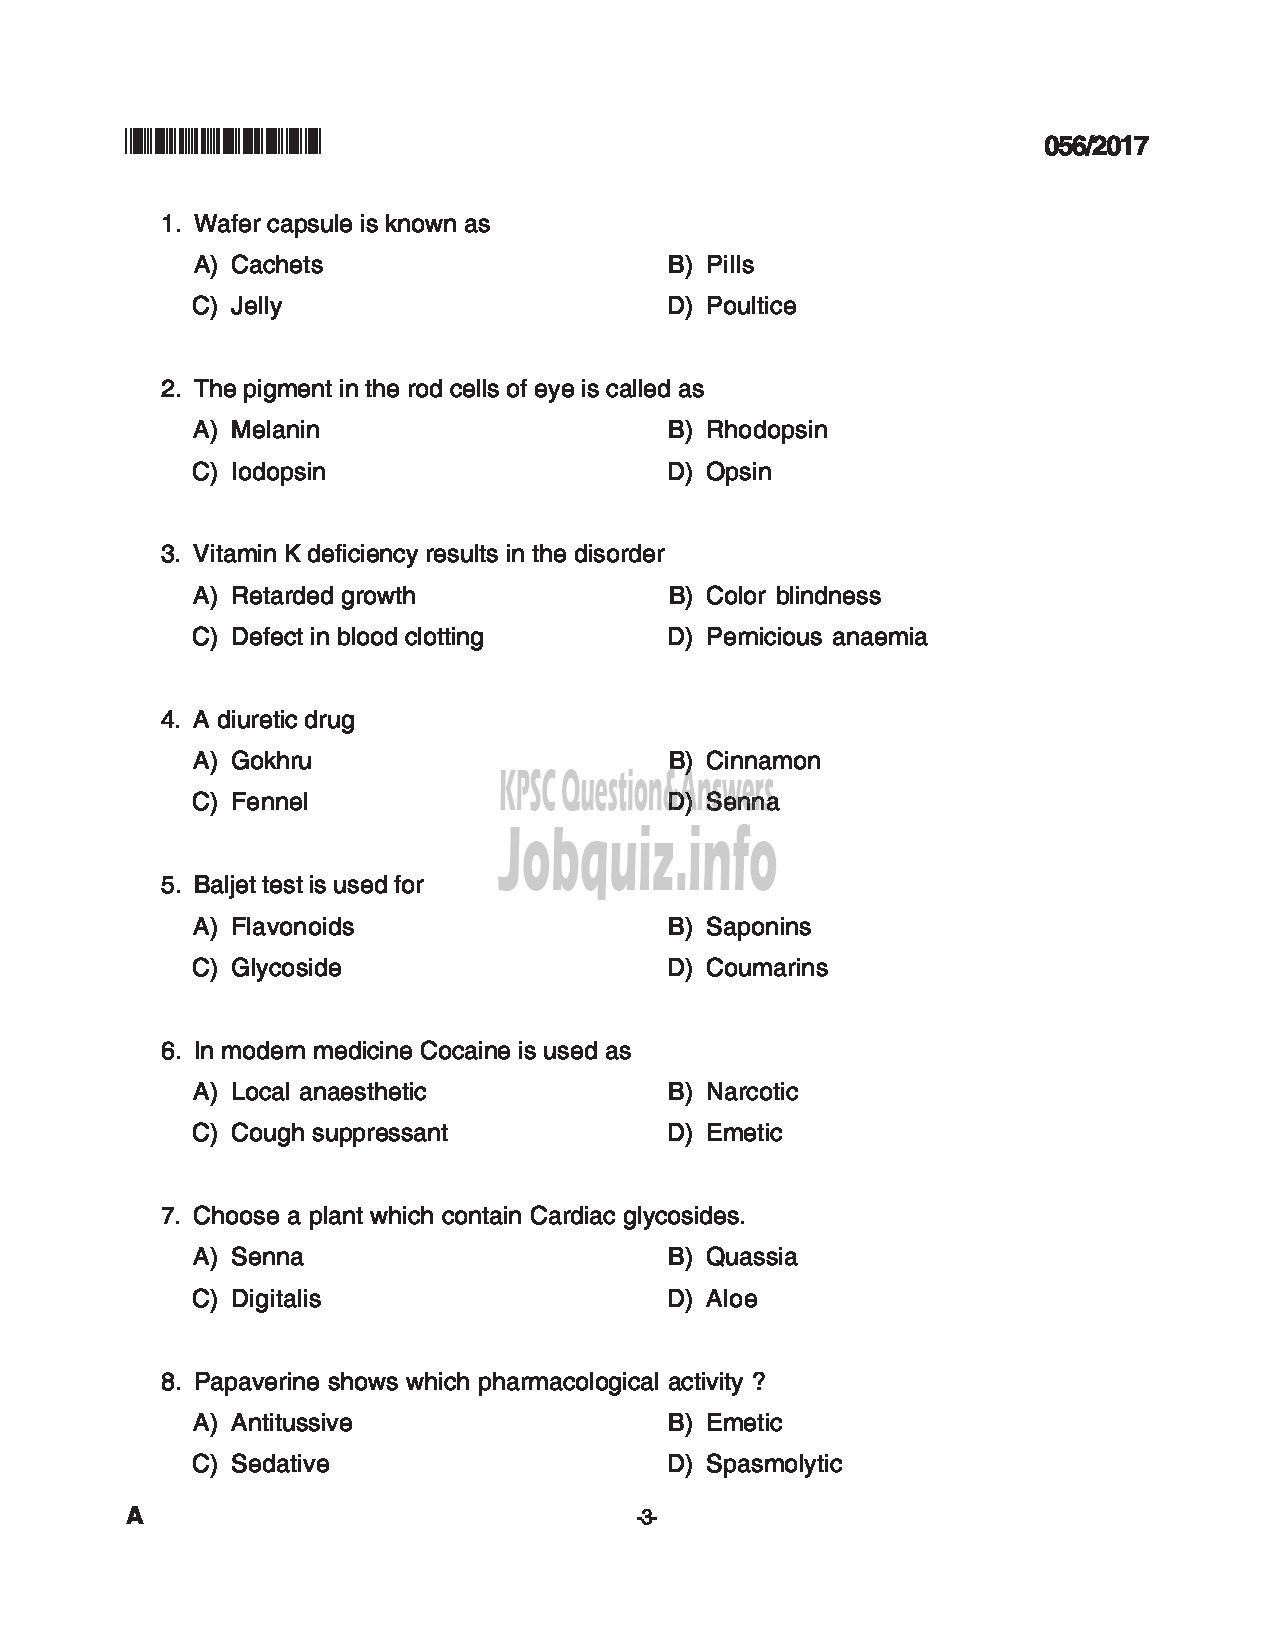 Kerala PSC Question Paper - PHARMACIST GRADE II INSURANCE MEDICAL SERVICES QUESTION PAPER-3